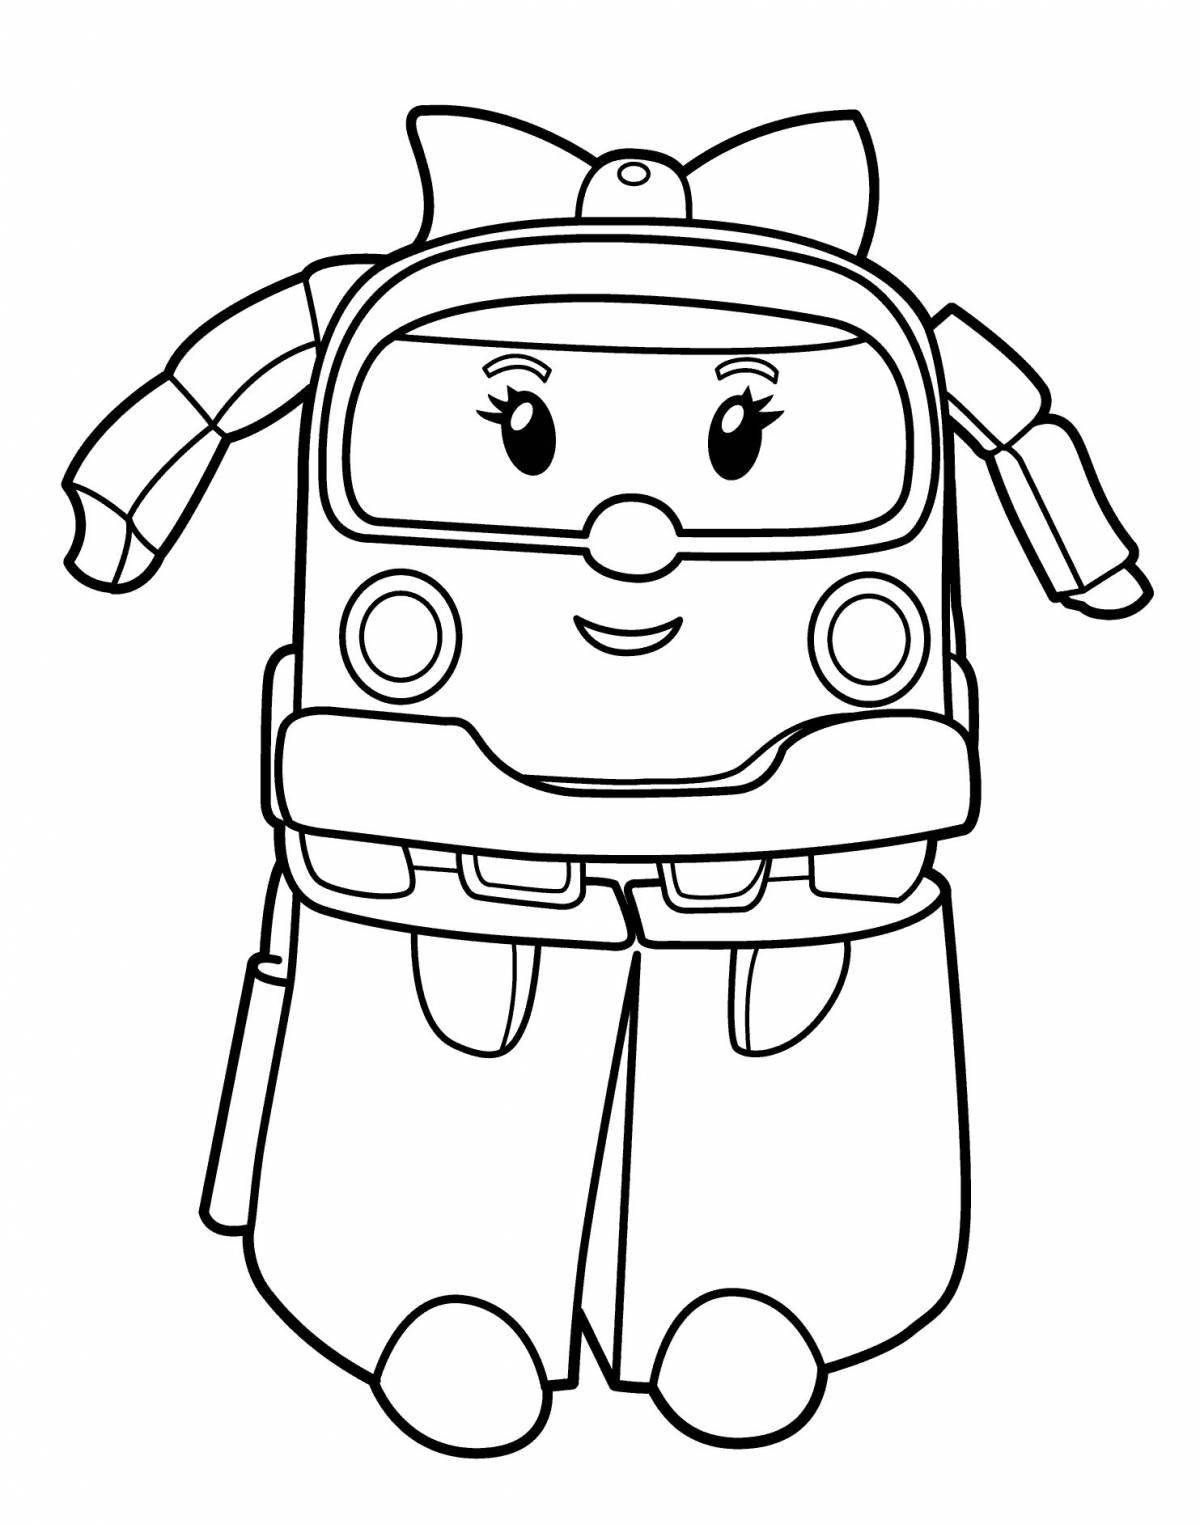 Colorful Ember Robocar Poly Coloring Page